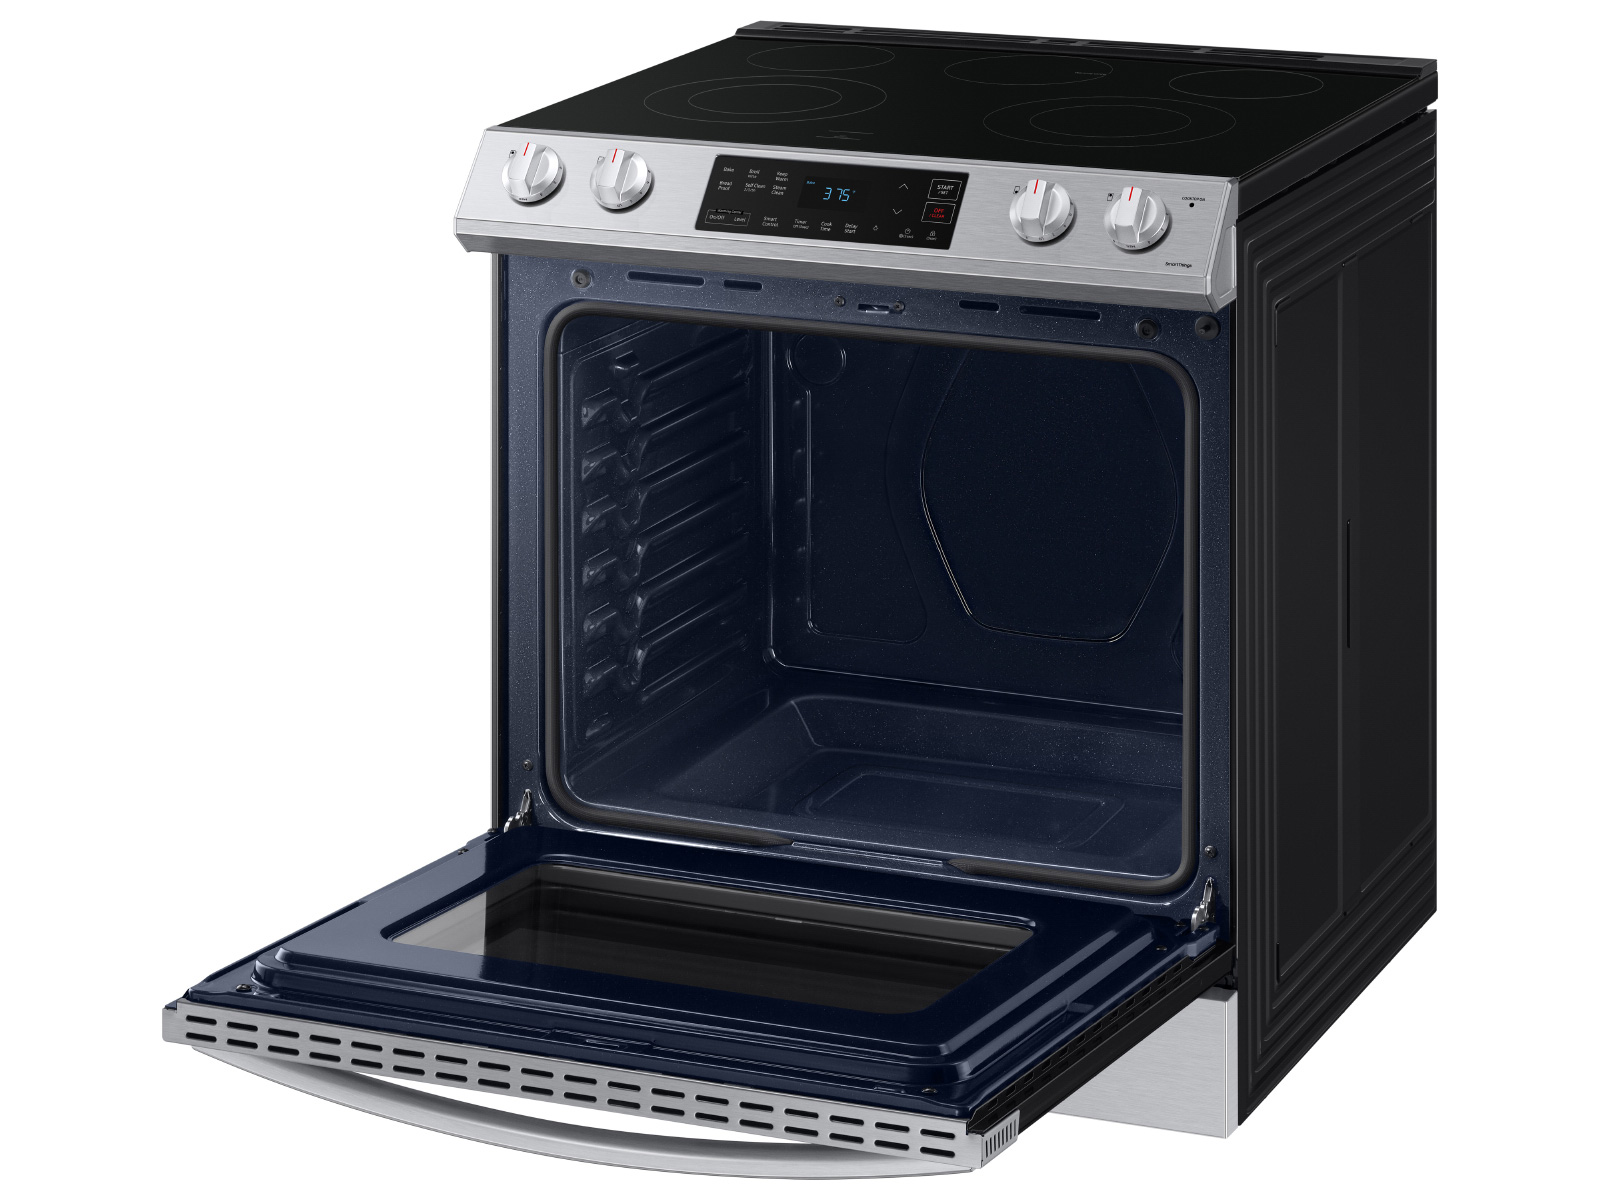 Samsung 6.3 Cu. ft. Stainless Steel Smart Freestanding Electric Range with Rapid Boil & Self Clean